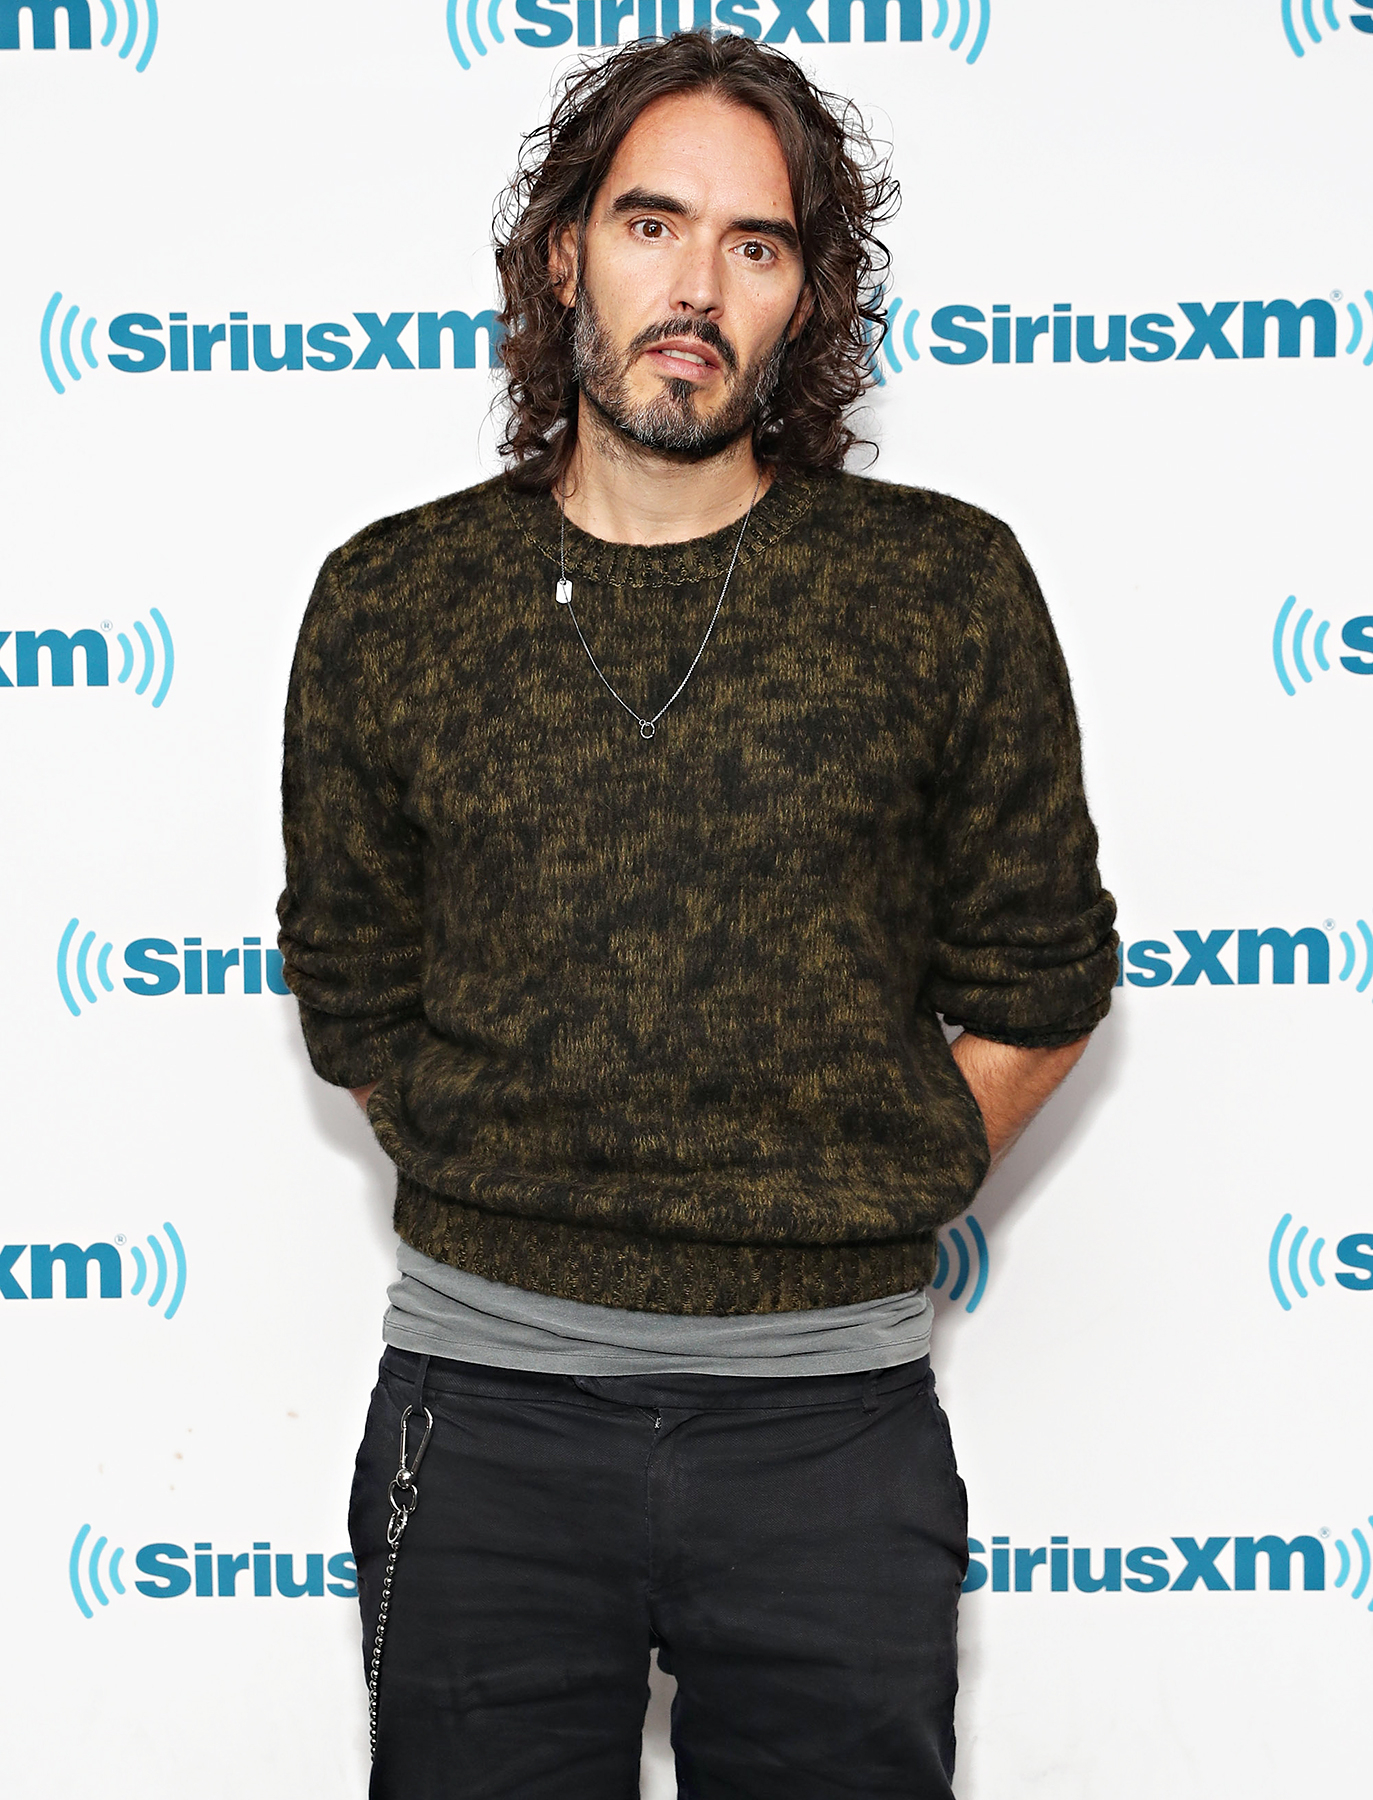 Russell Brand on Heroin, Sex Addiction and Katy Perry photo